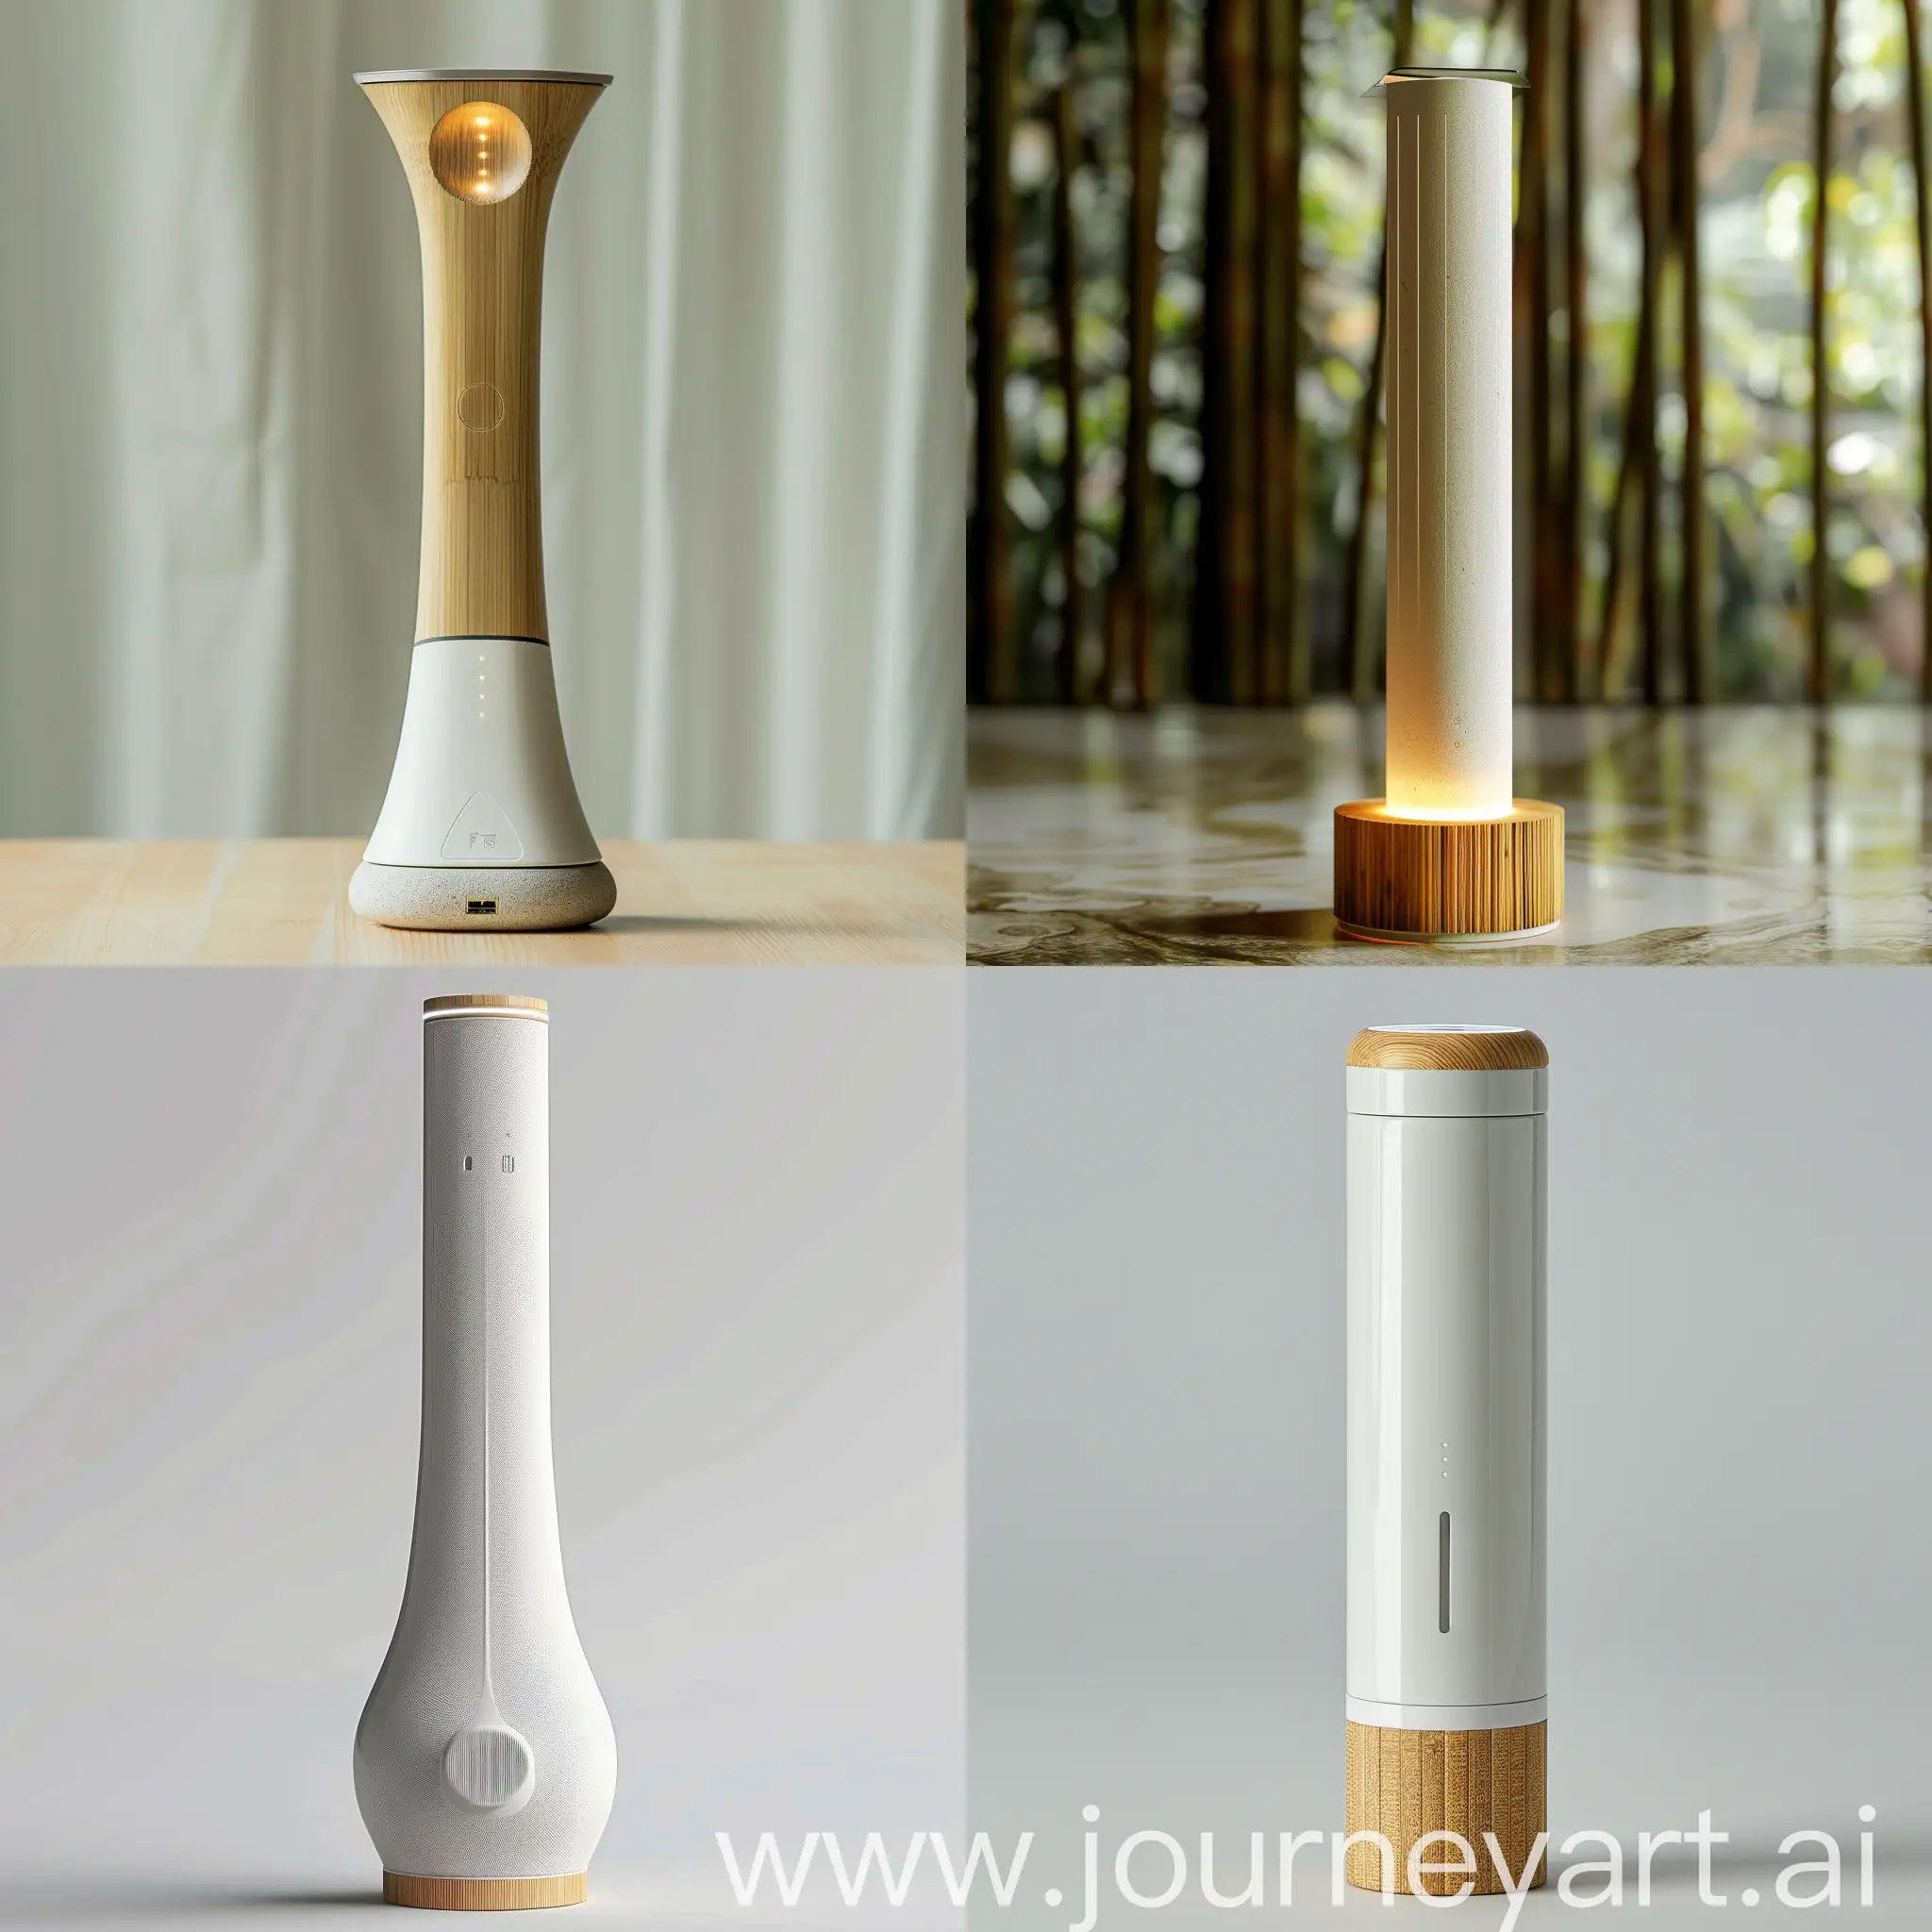 Sustainable-Bamboo-Smart-Energy-Management-Device-with-LED-Light-Tag